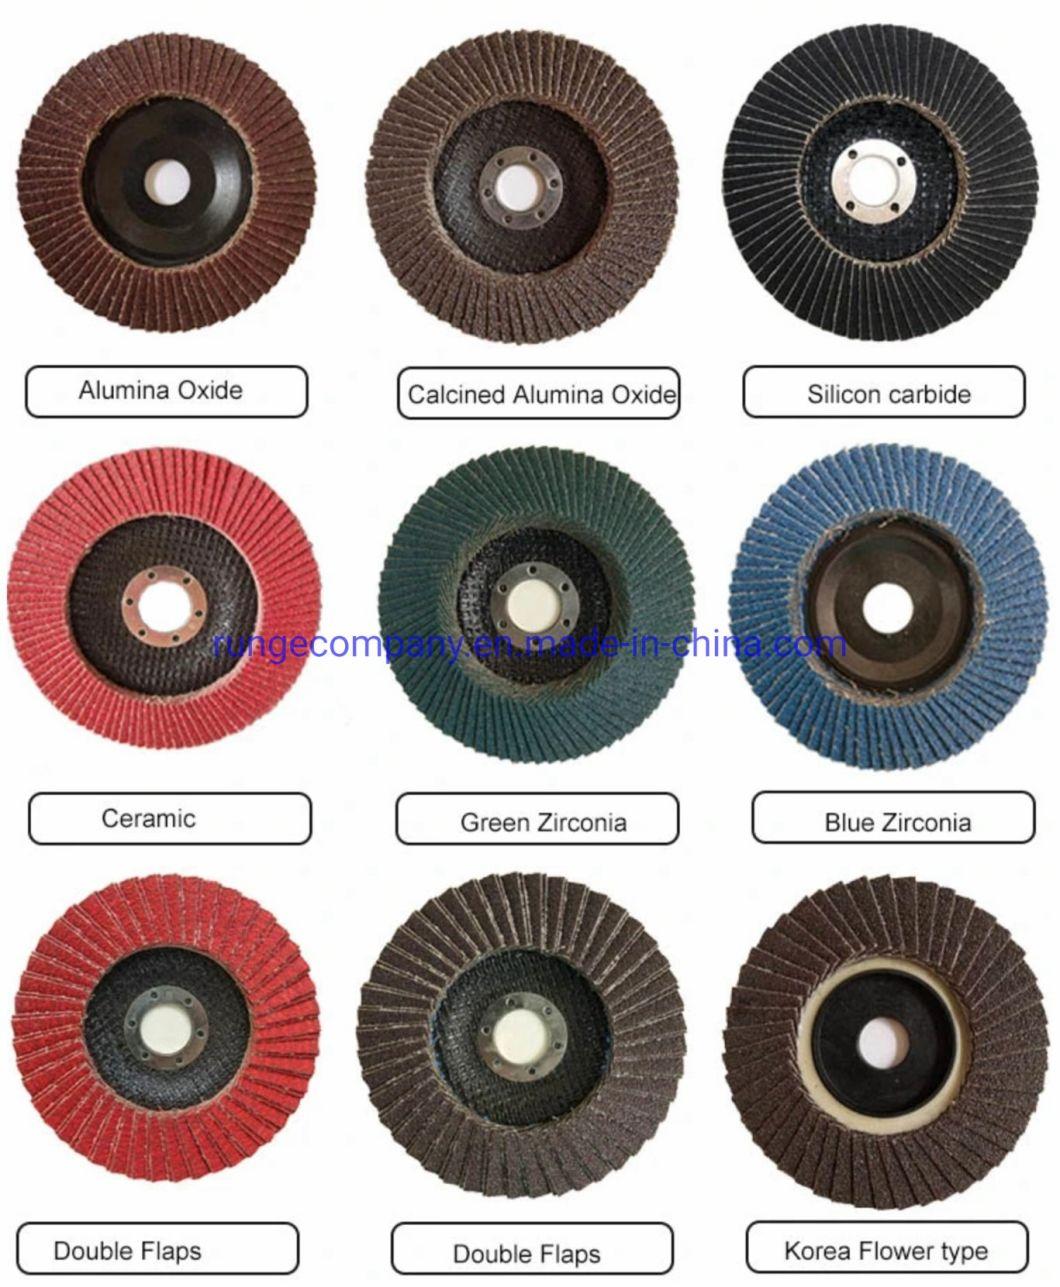 Abrasives 2" X 1" X 1/4" Shank Mounted High-Quality Resin Bond Aluminum Oxide Flap Wheels for Stainless Steel Metal Power Tools Power Drill